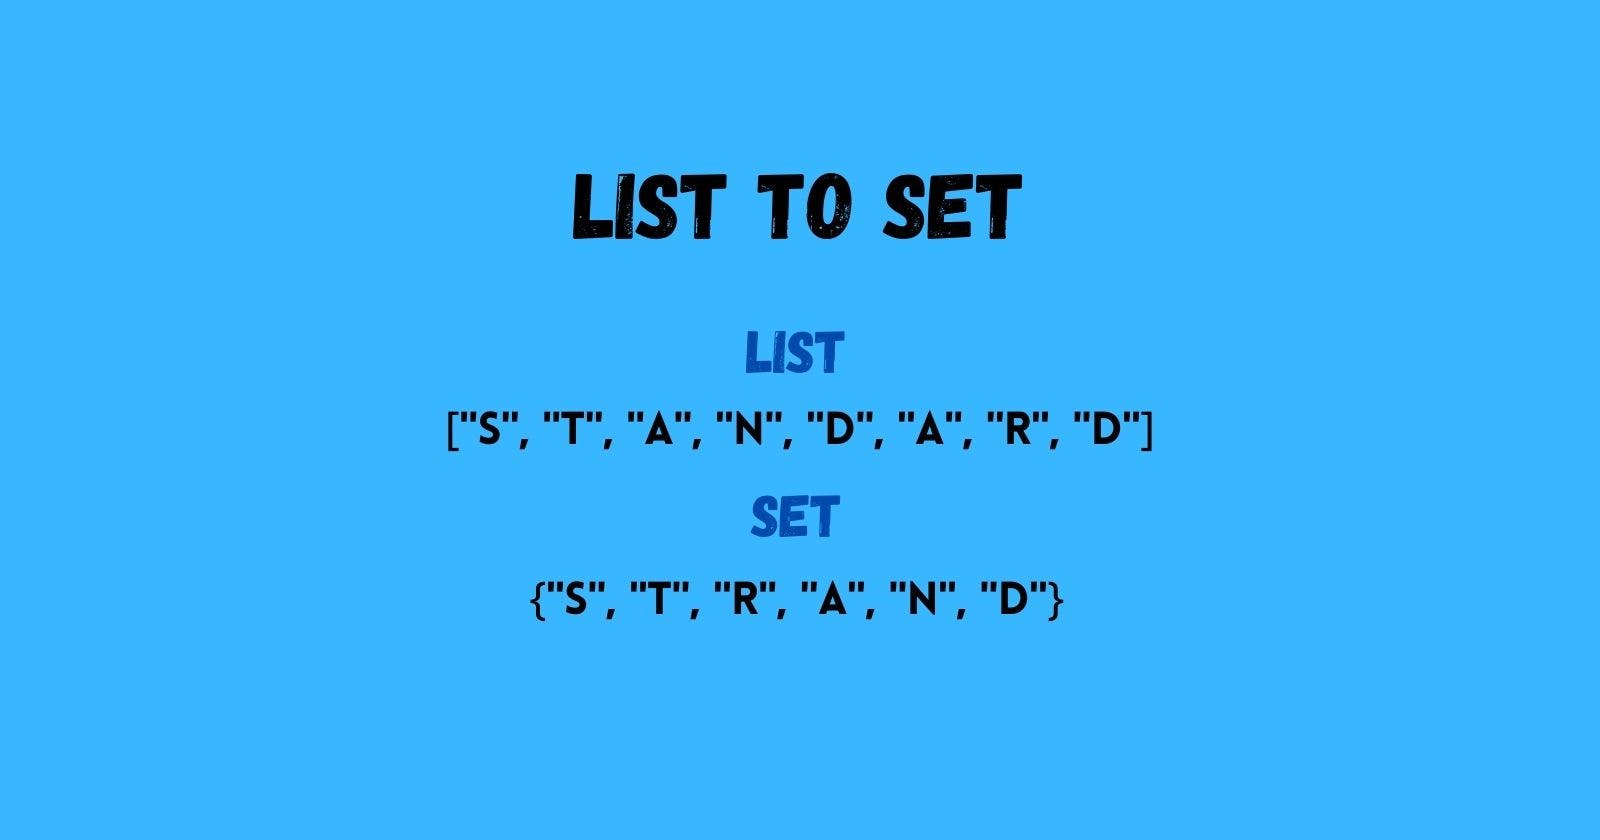 Creating a New List with Multiple Occurrences Removed Using the Set() Function in Python